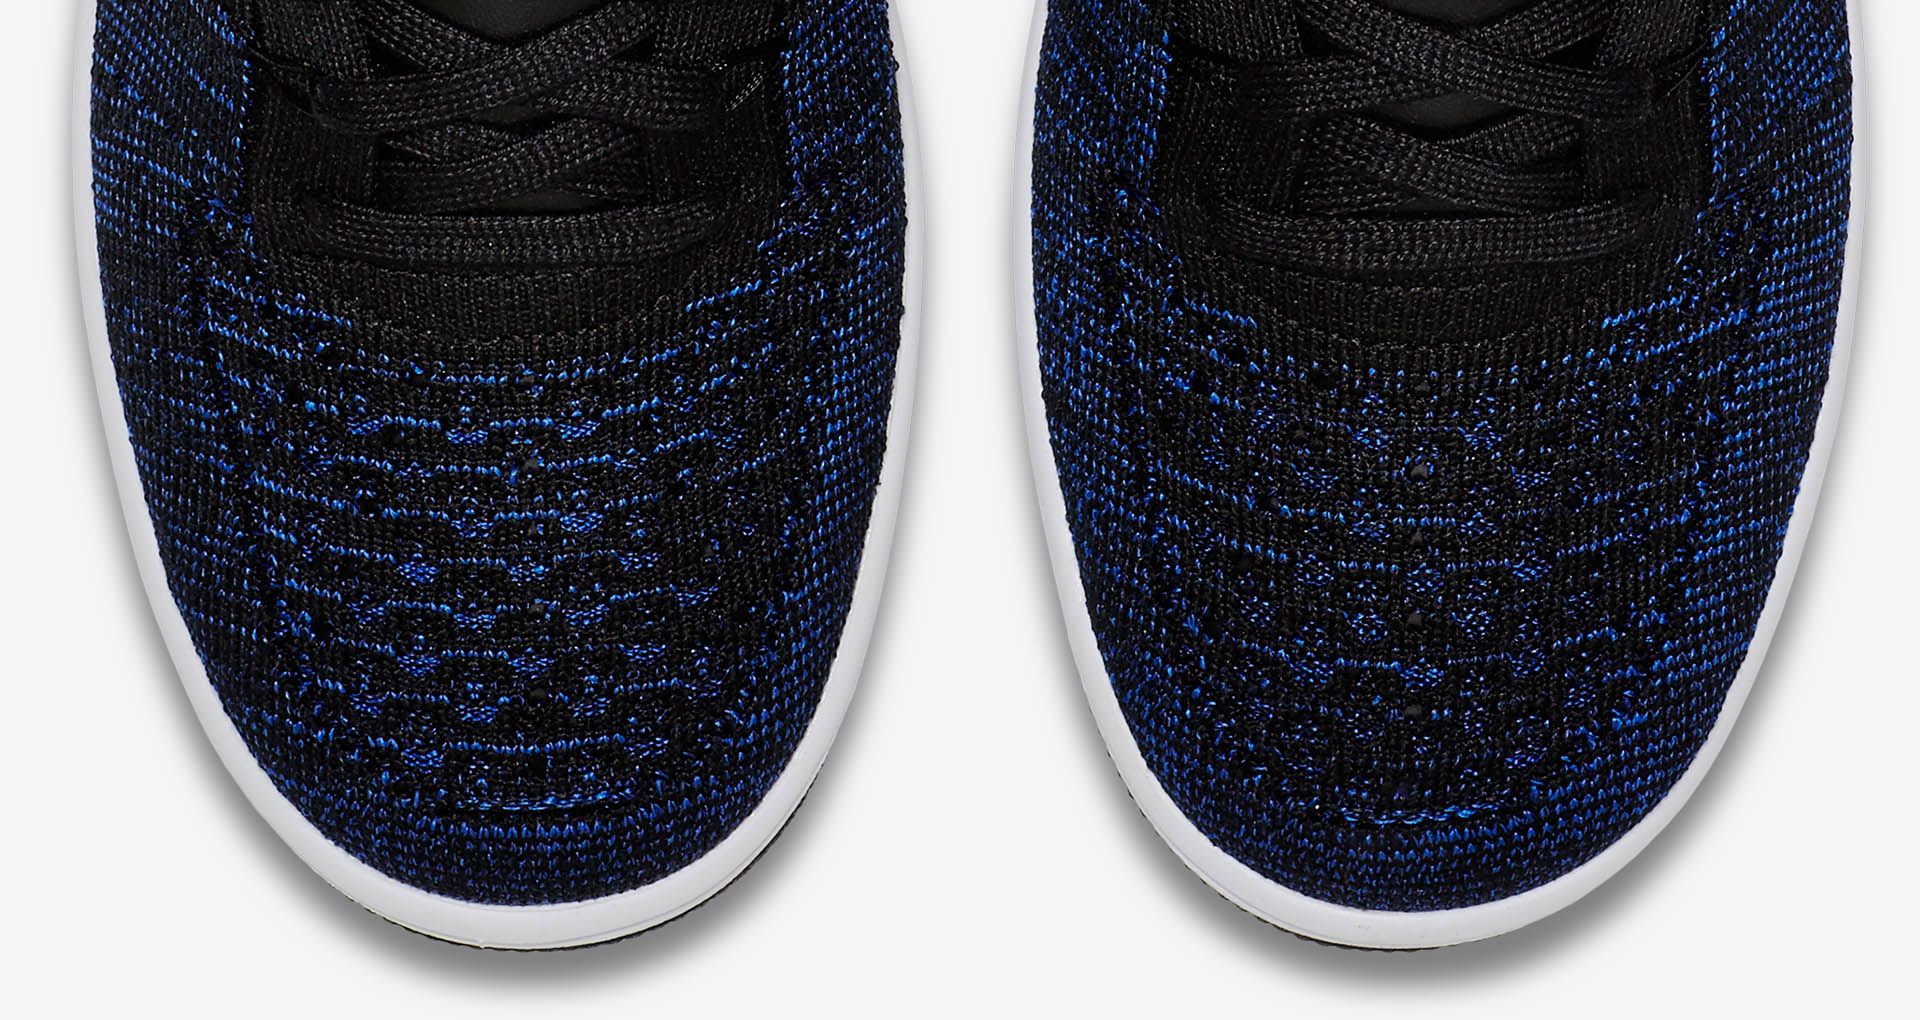 Nike Air Force 1 Ultra Flyknit Mid 'Game Royal' Release Date. Nike SNKRS